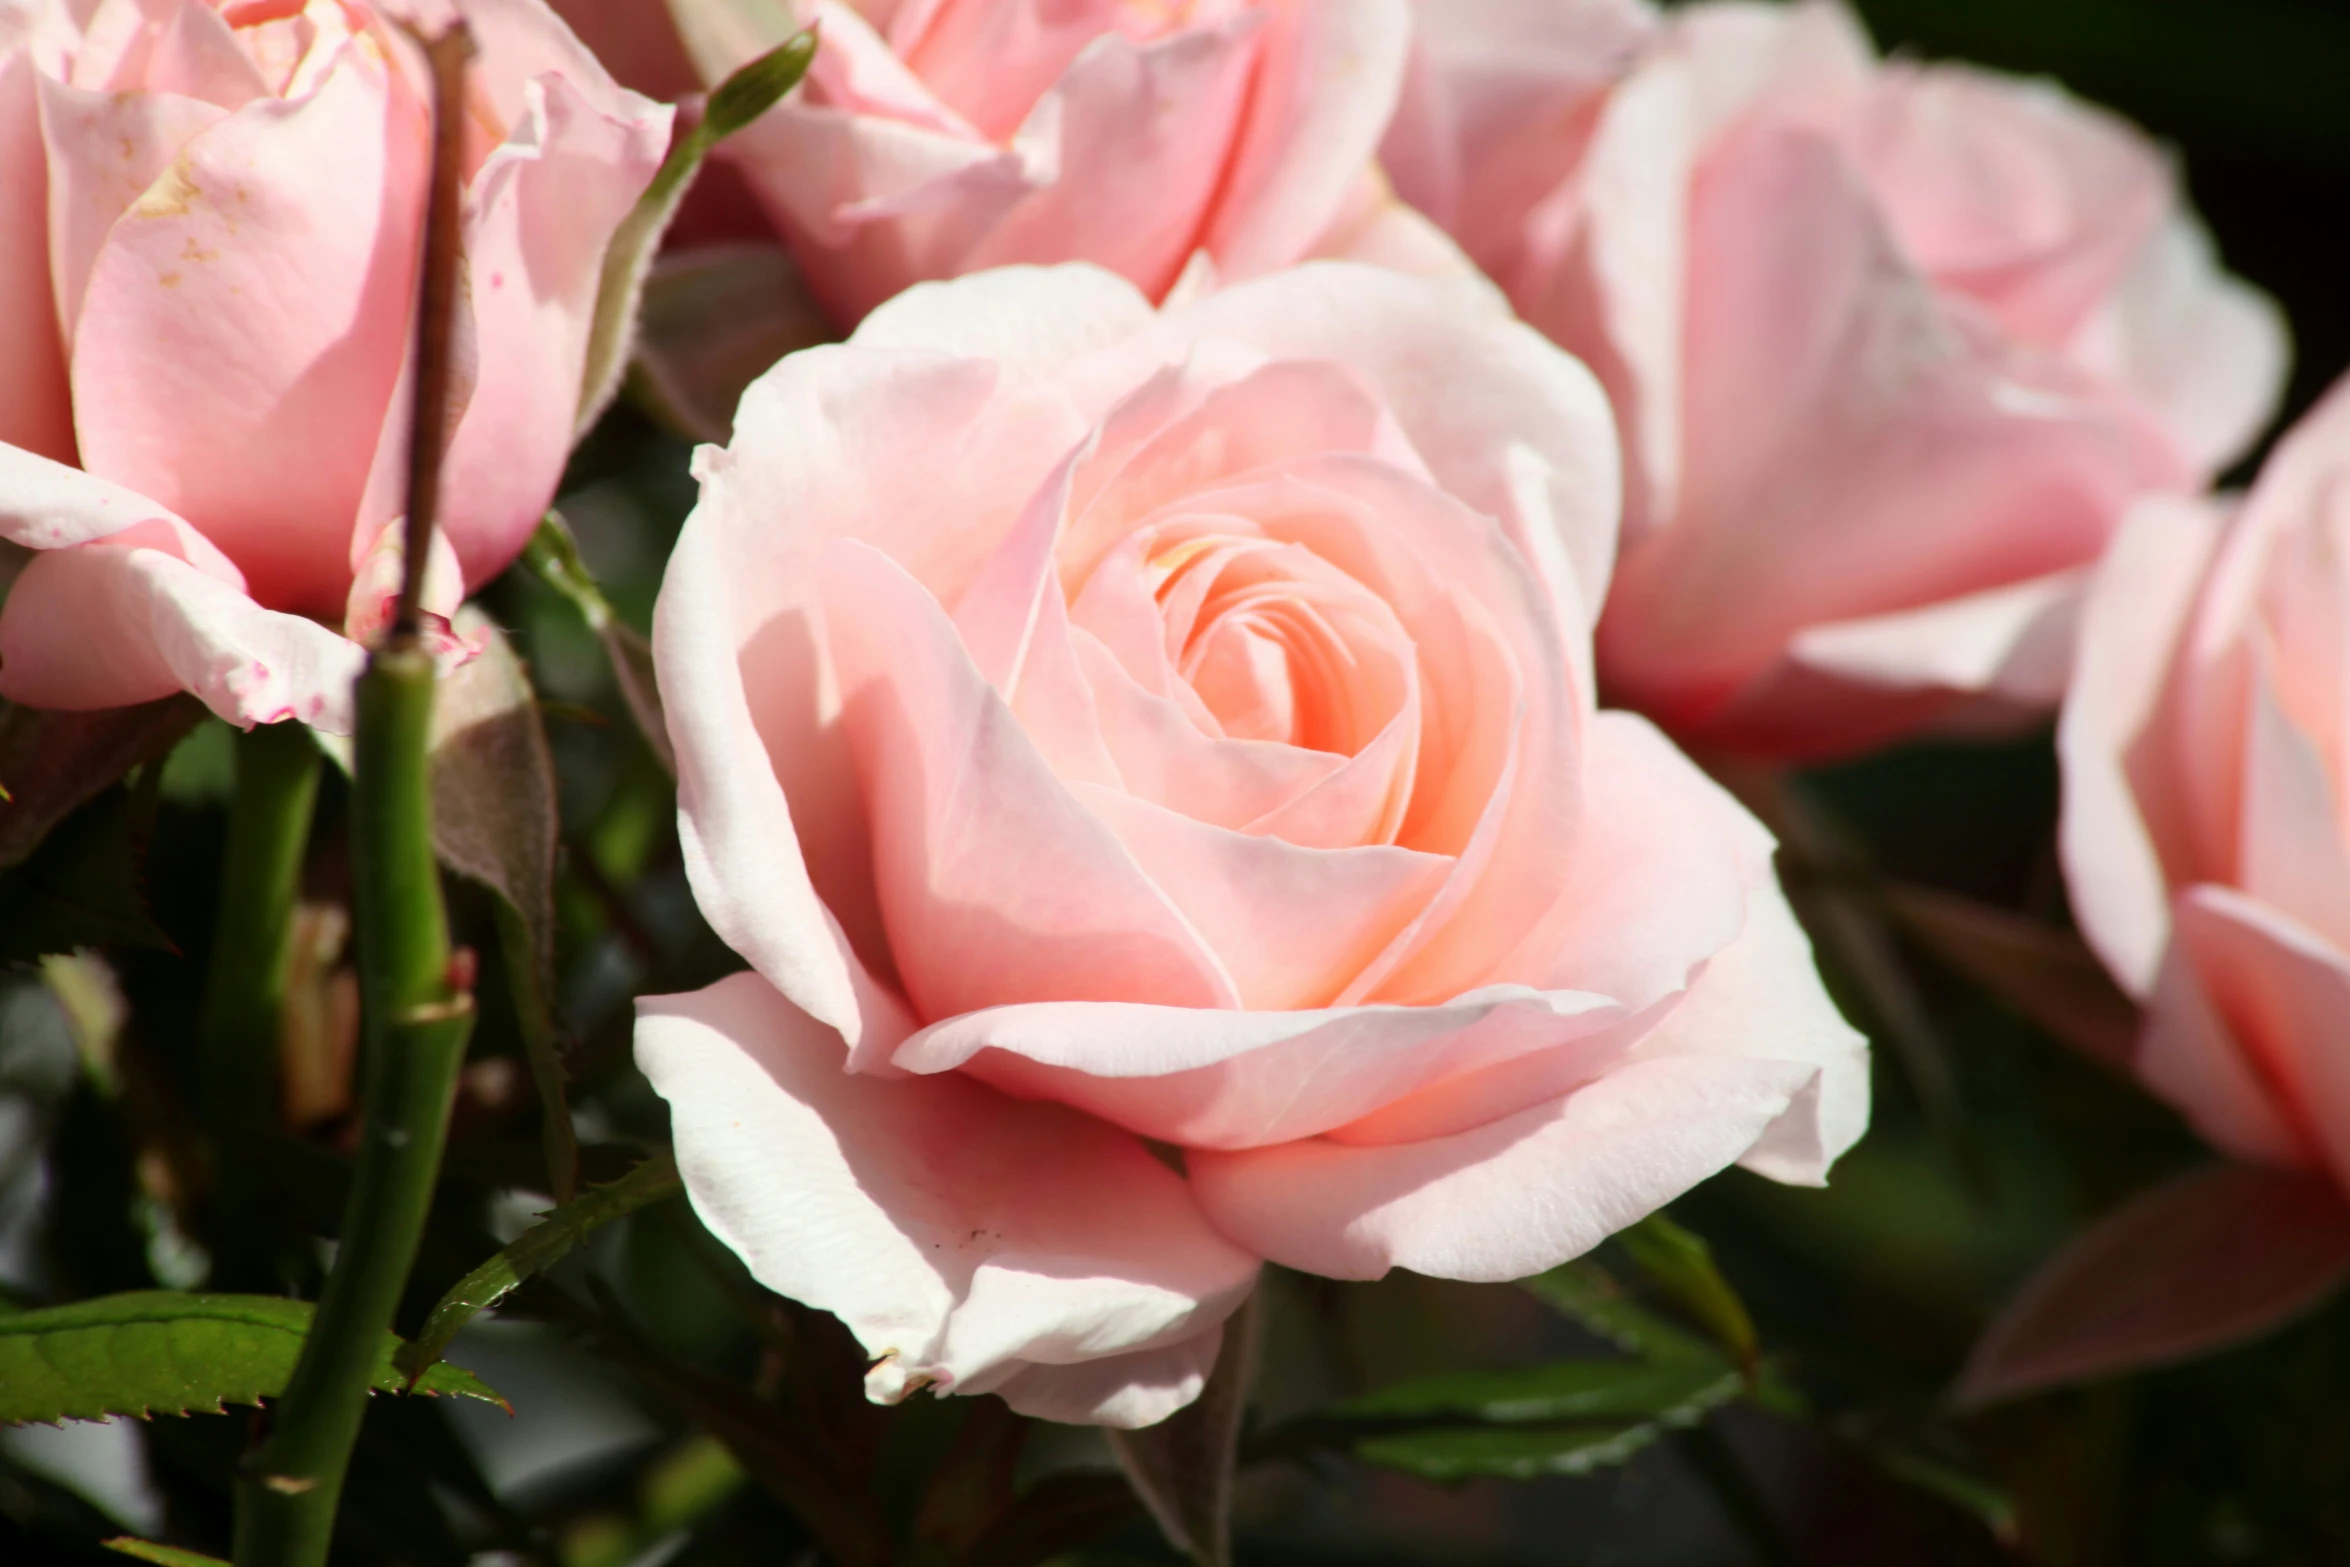 pink roses bloom in a sunny garden setting